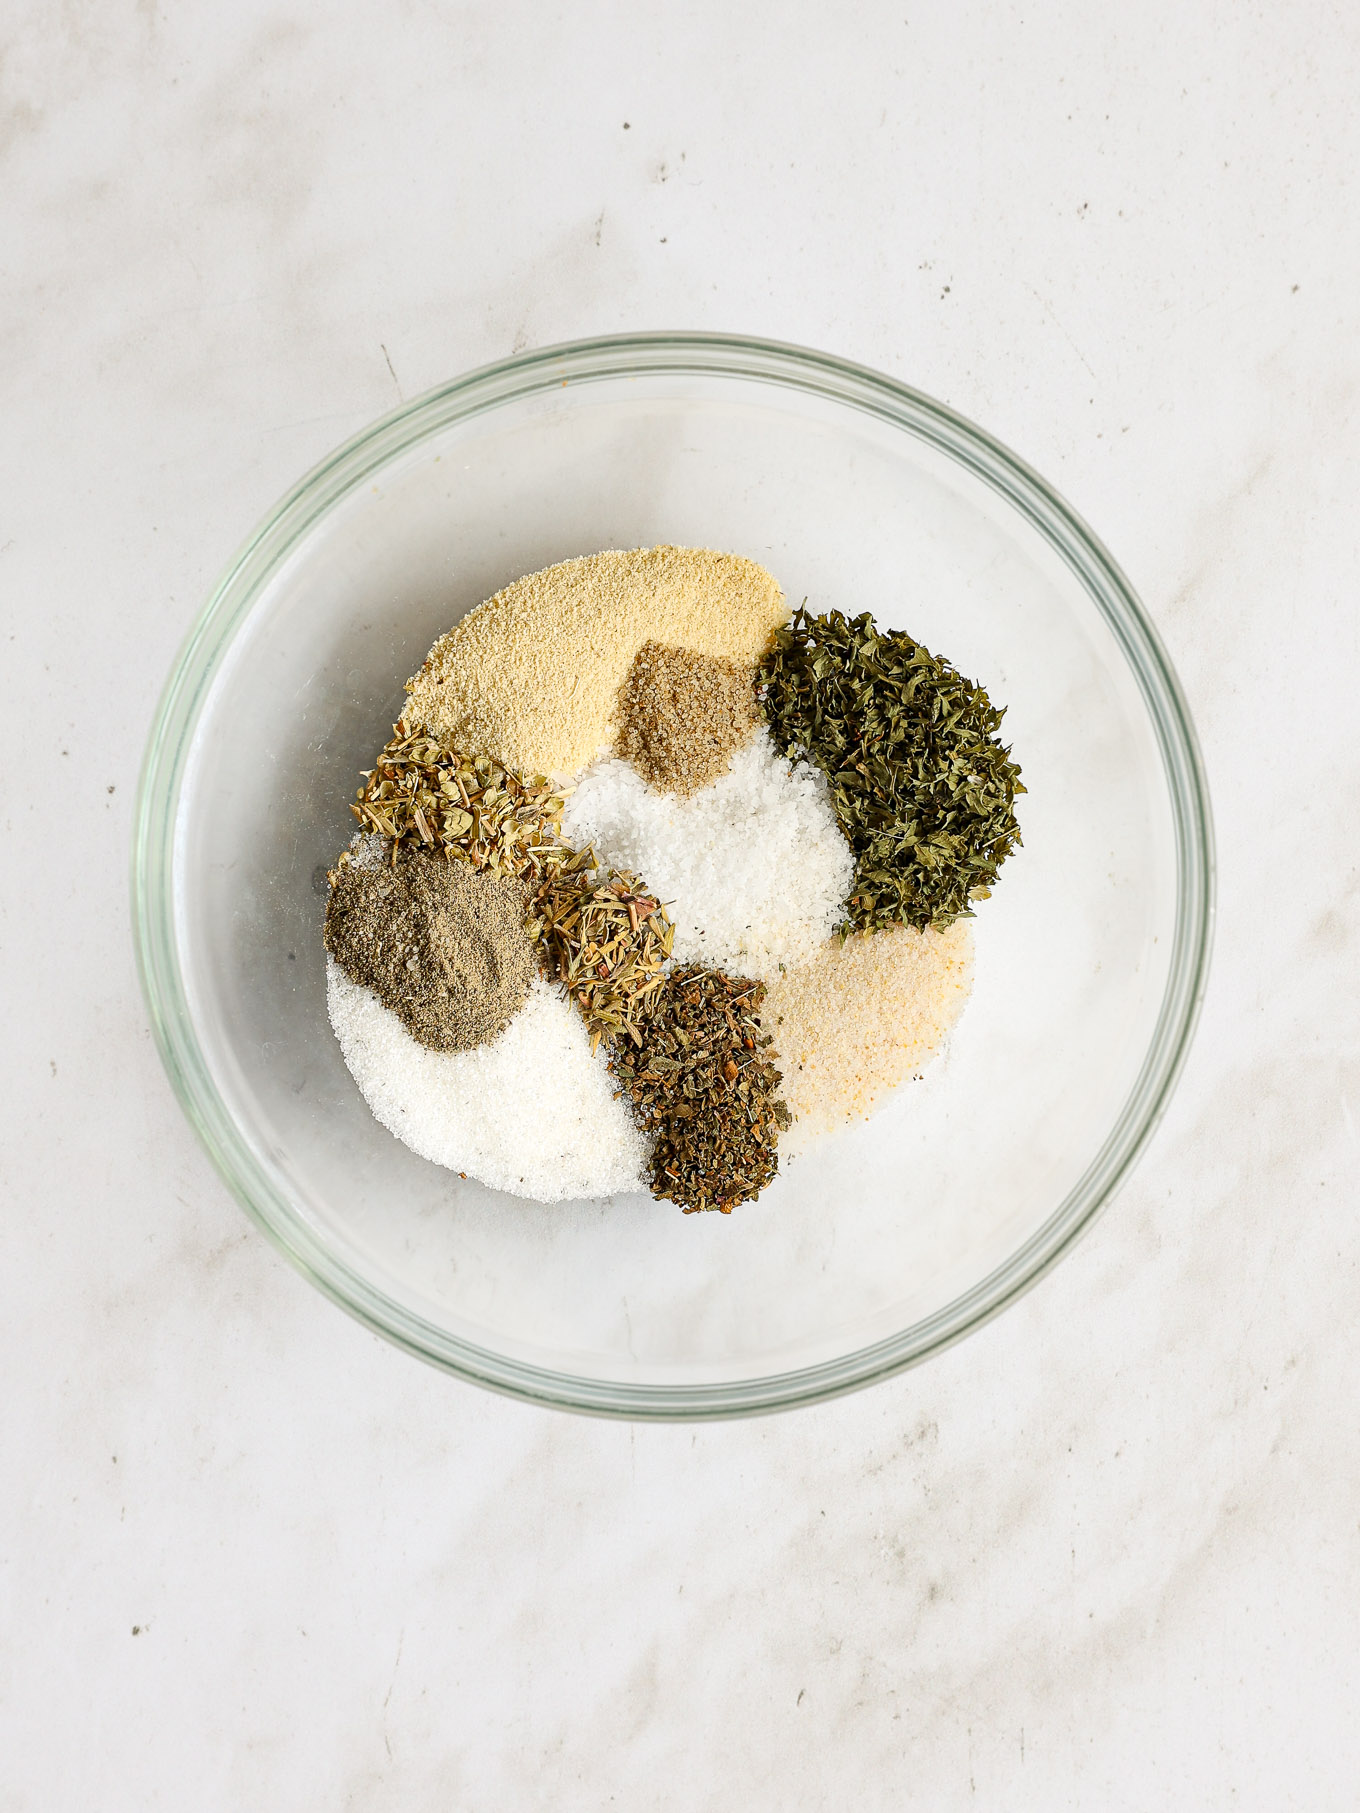 dressing spice mixture in a glass bowl.